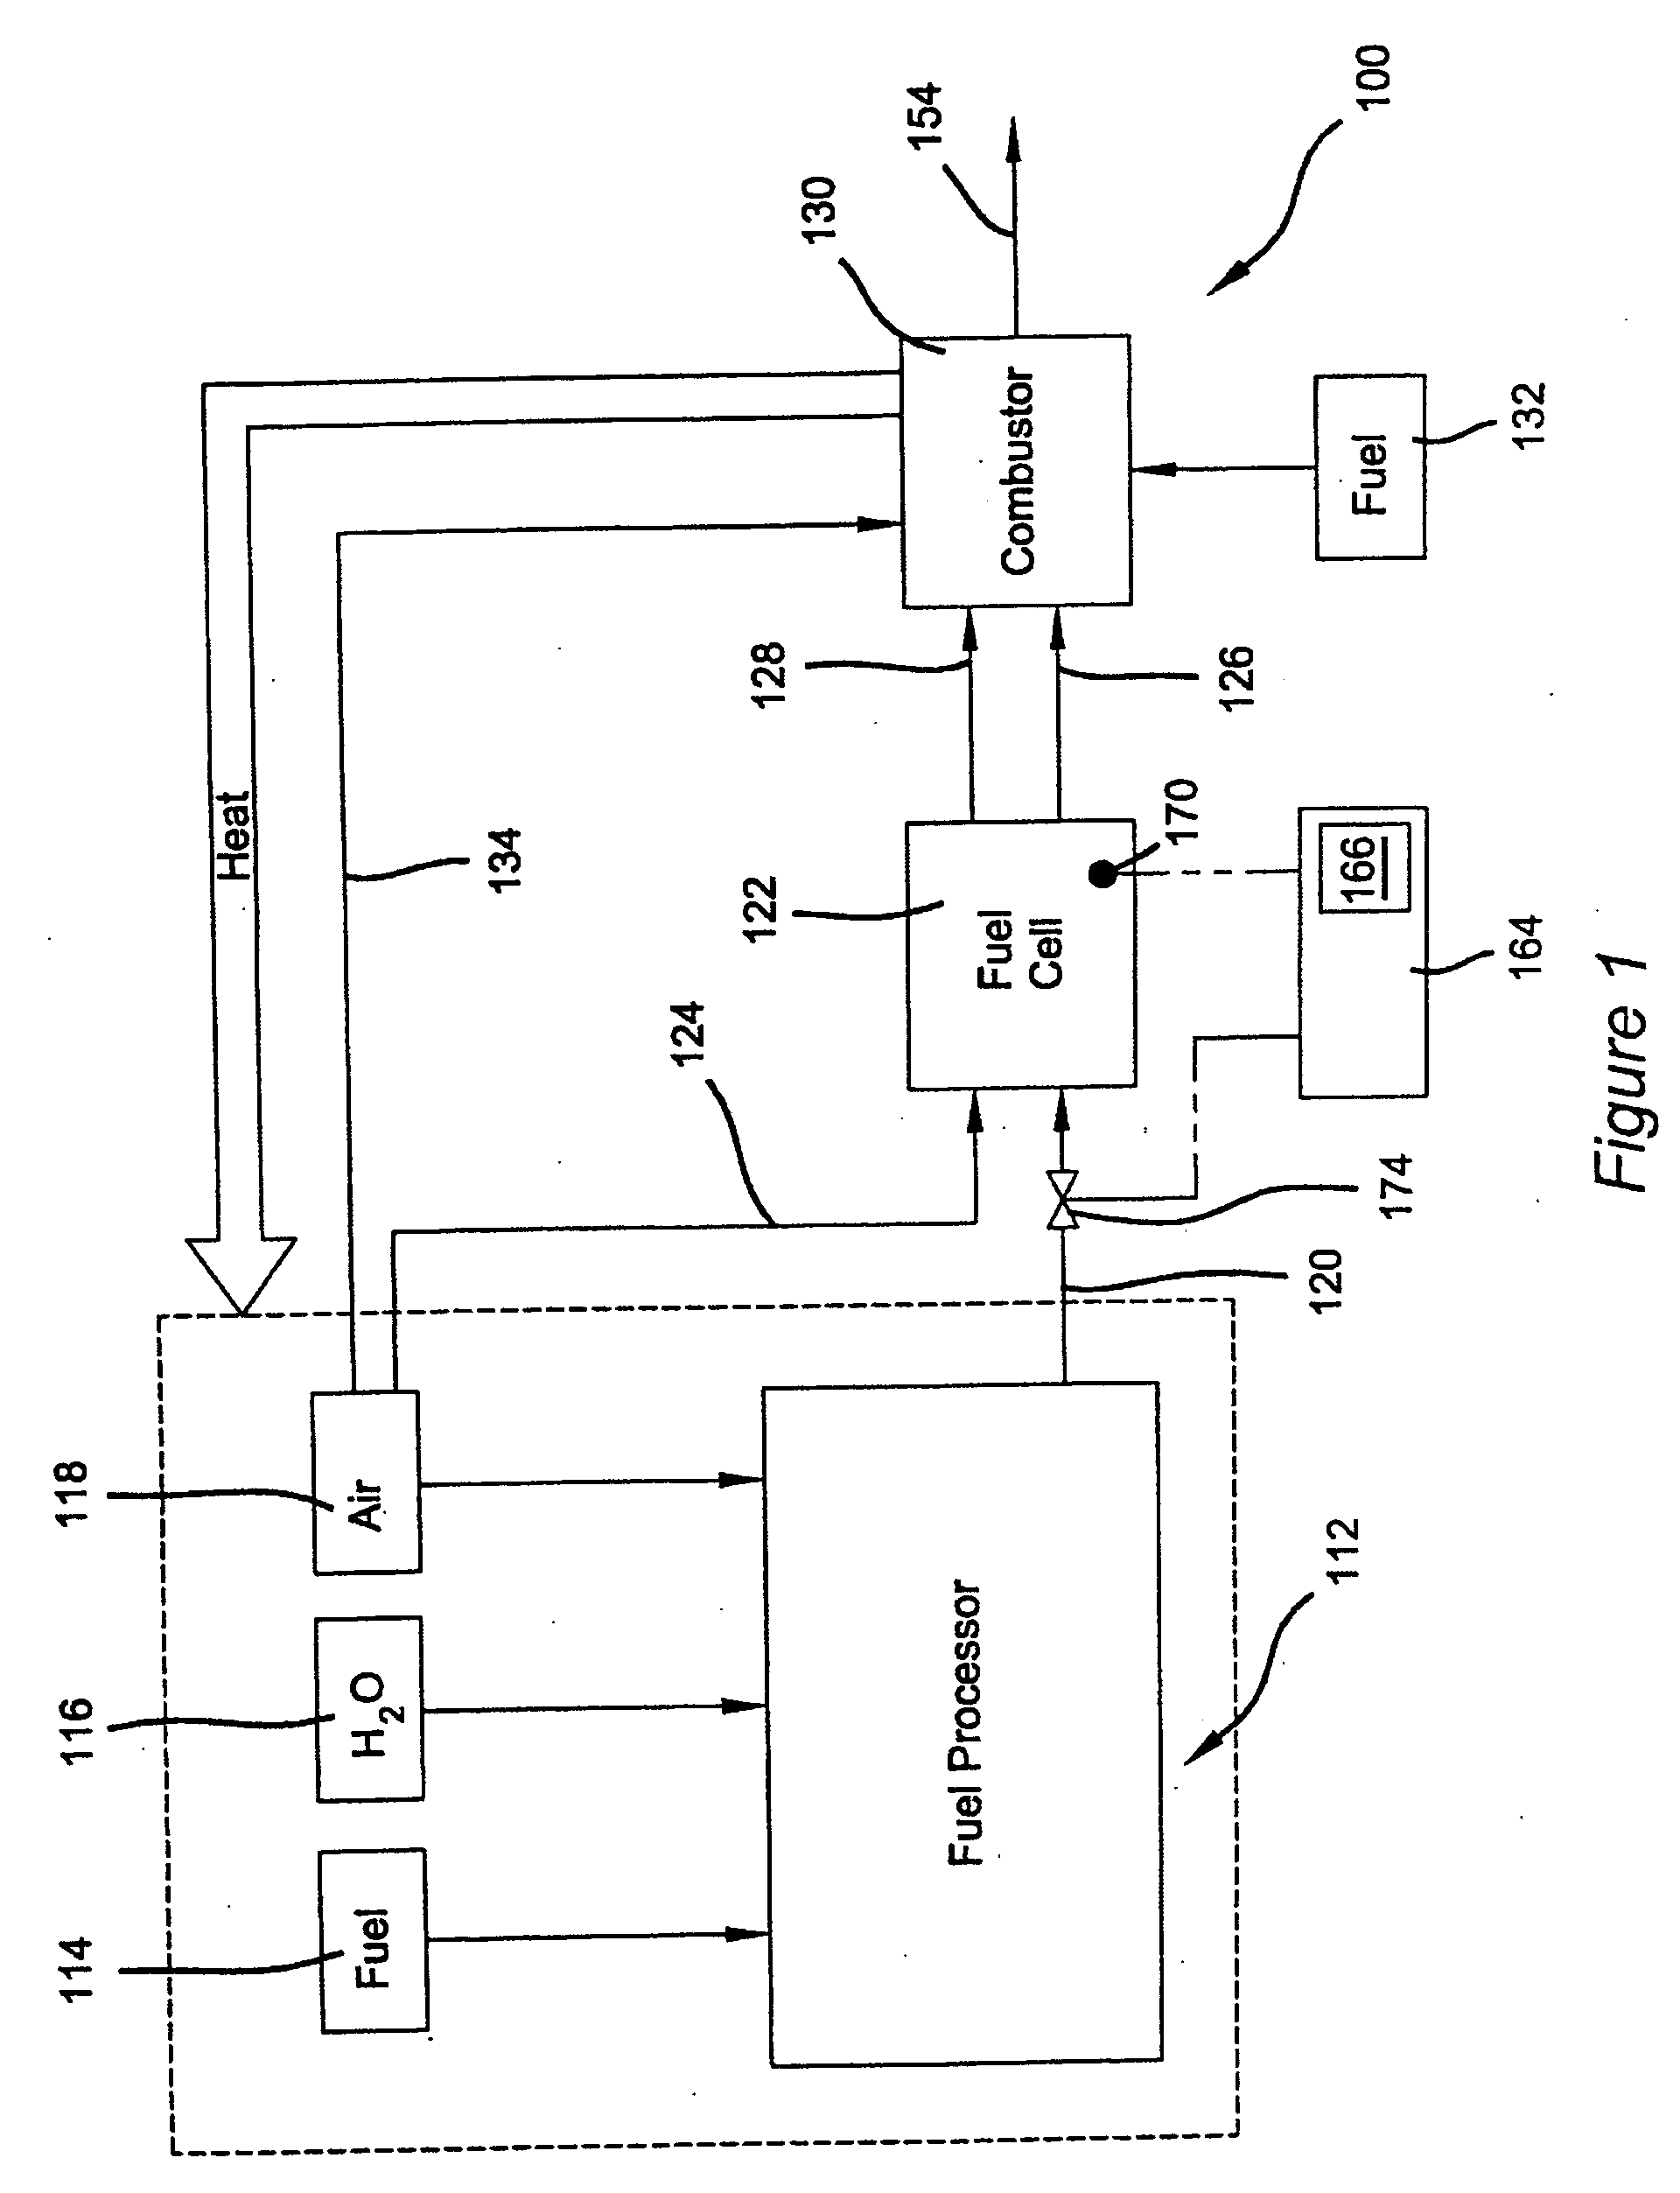 Electrical current measurement in a fuel cell